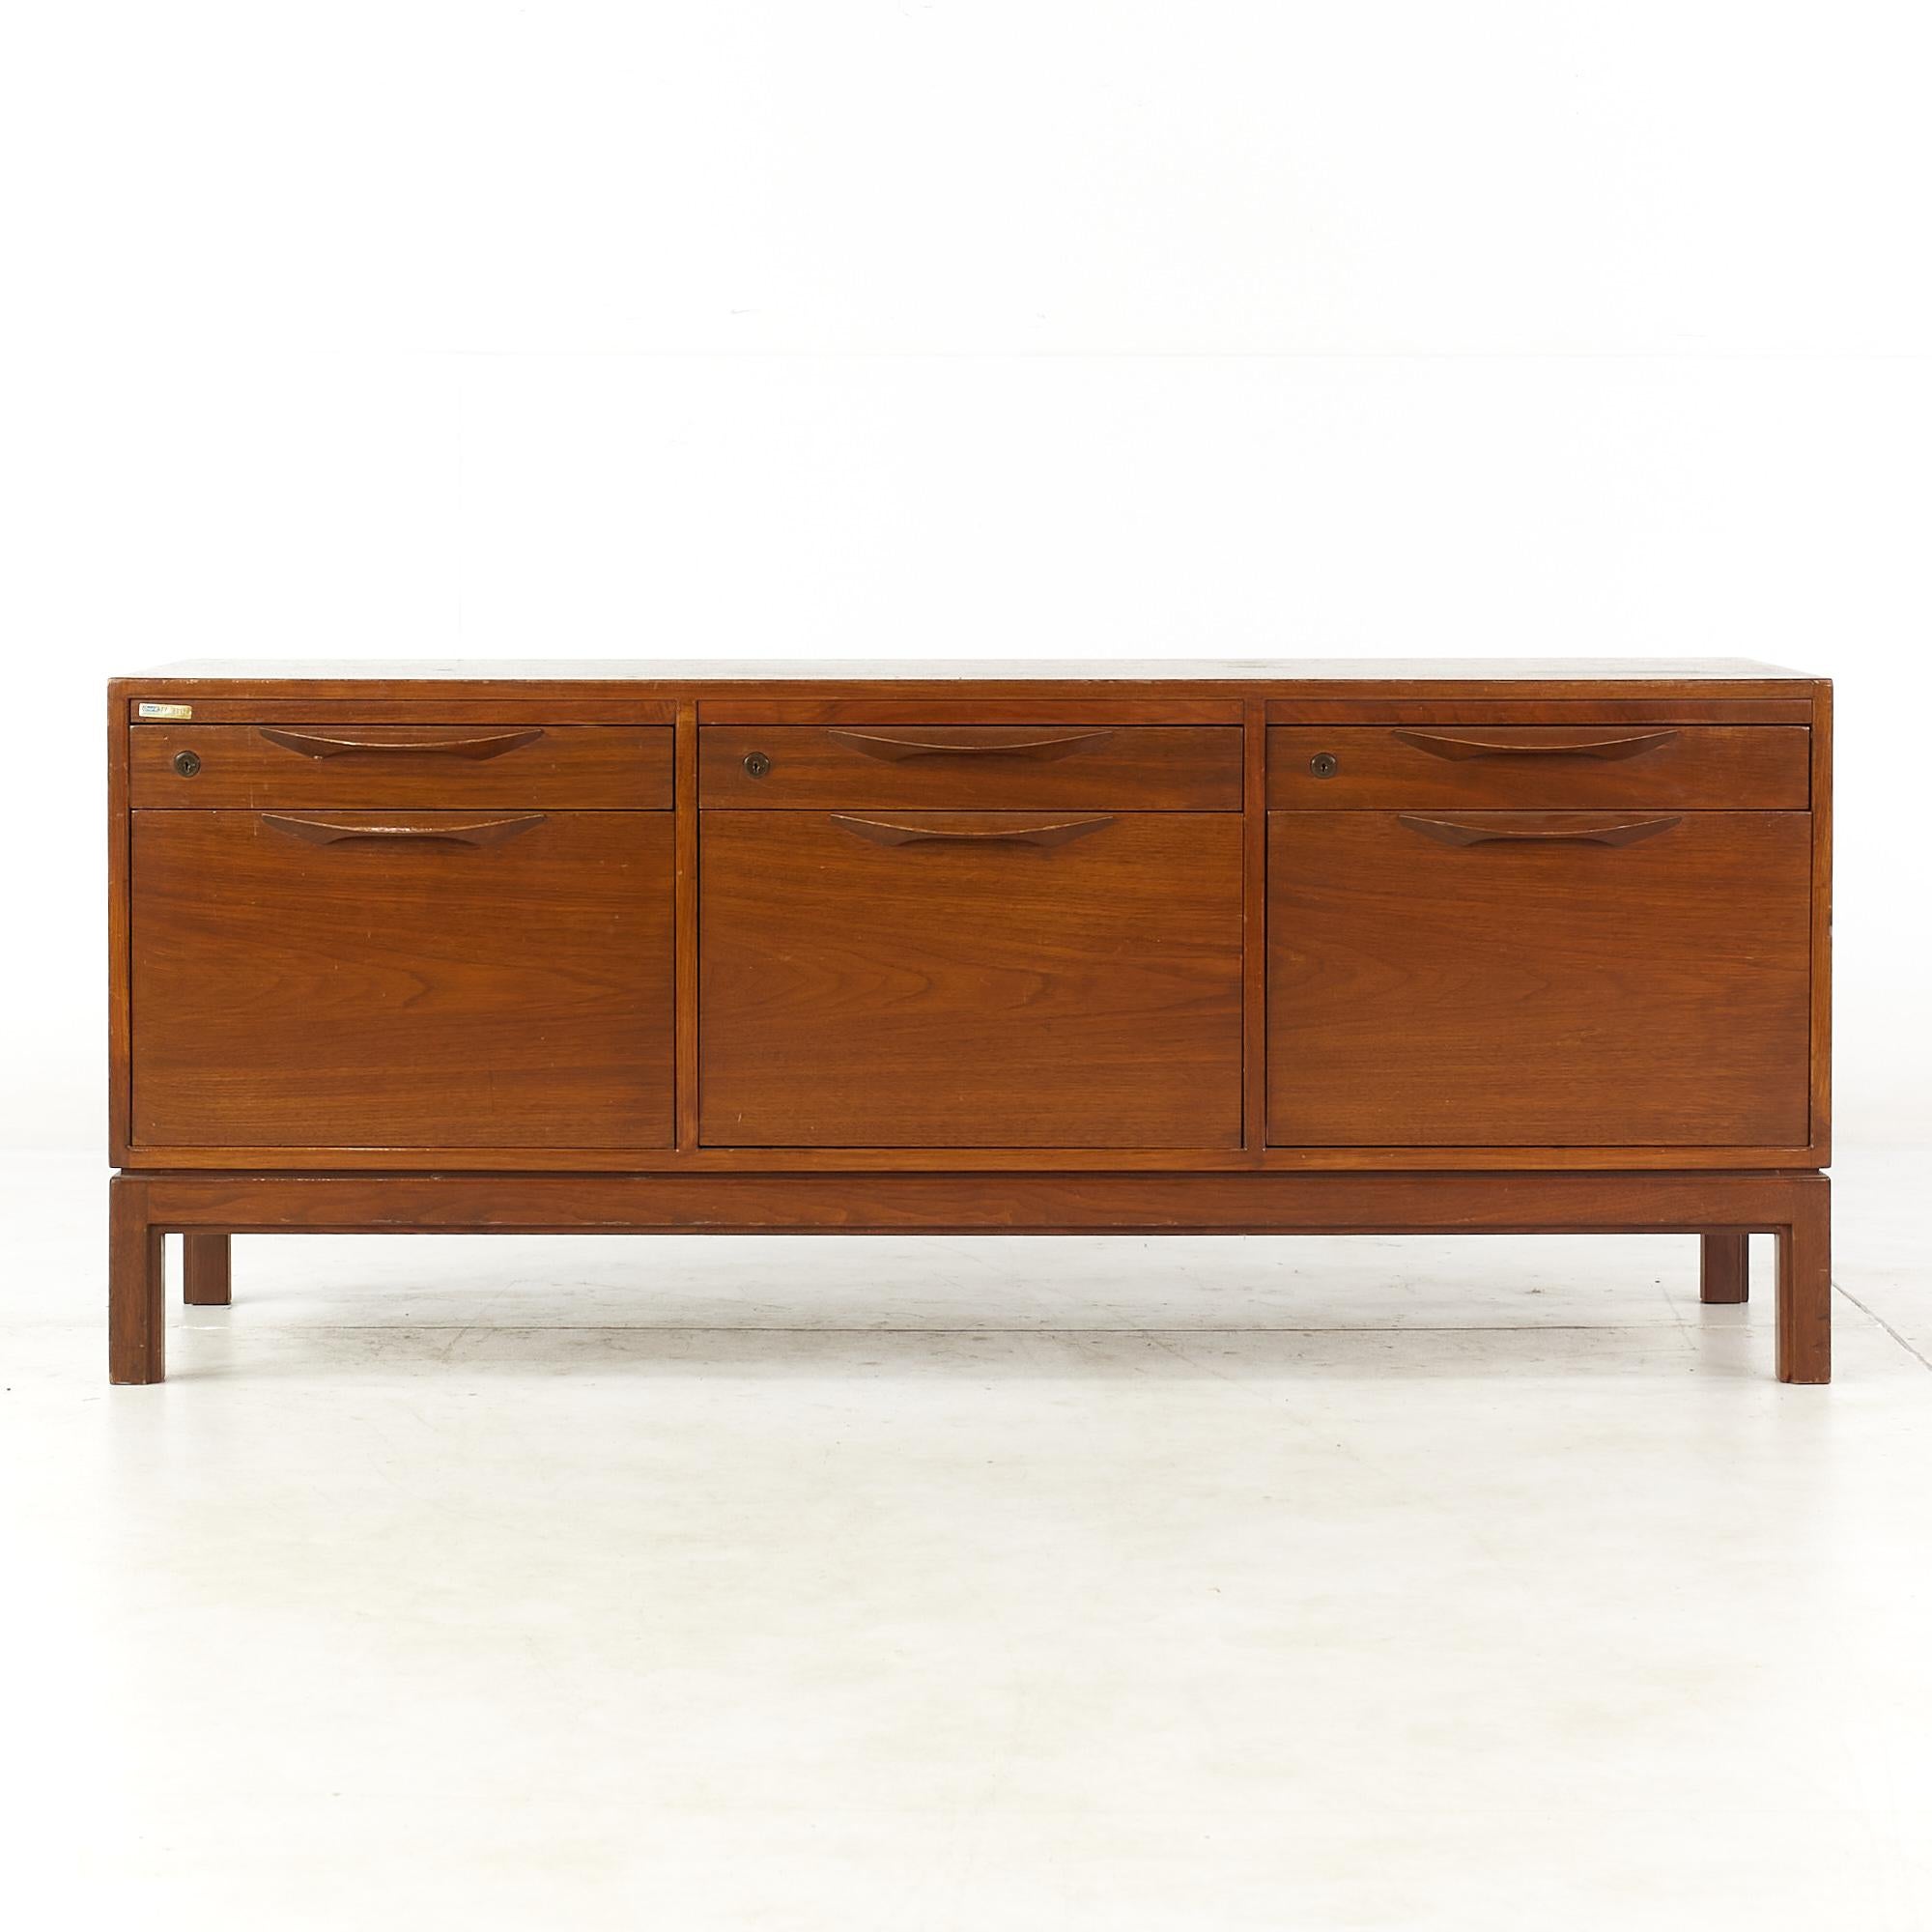 Jens Risom mid century walnut file cabinet Credenza.

This credenza measures: 58.5 wide x 20 deep x 24 inches high.

All pieces of furniture can be had in what we call restored vintage condition. That means the piece is restored upon purchase so